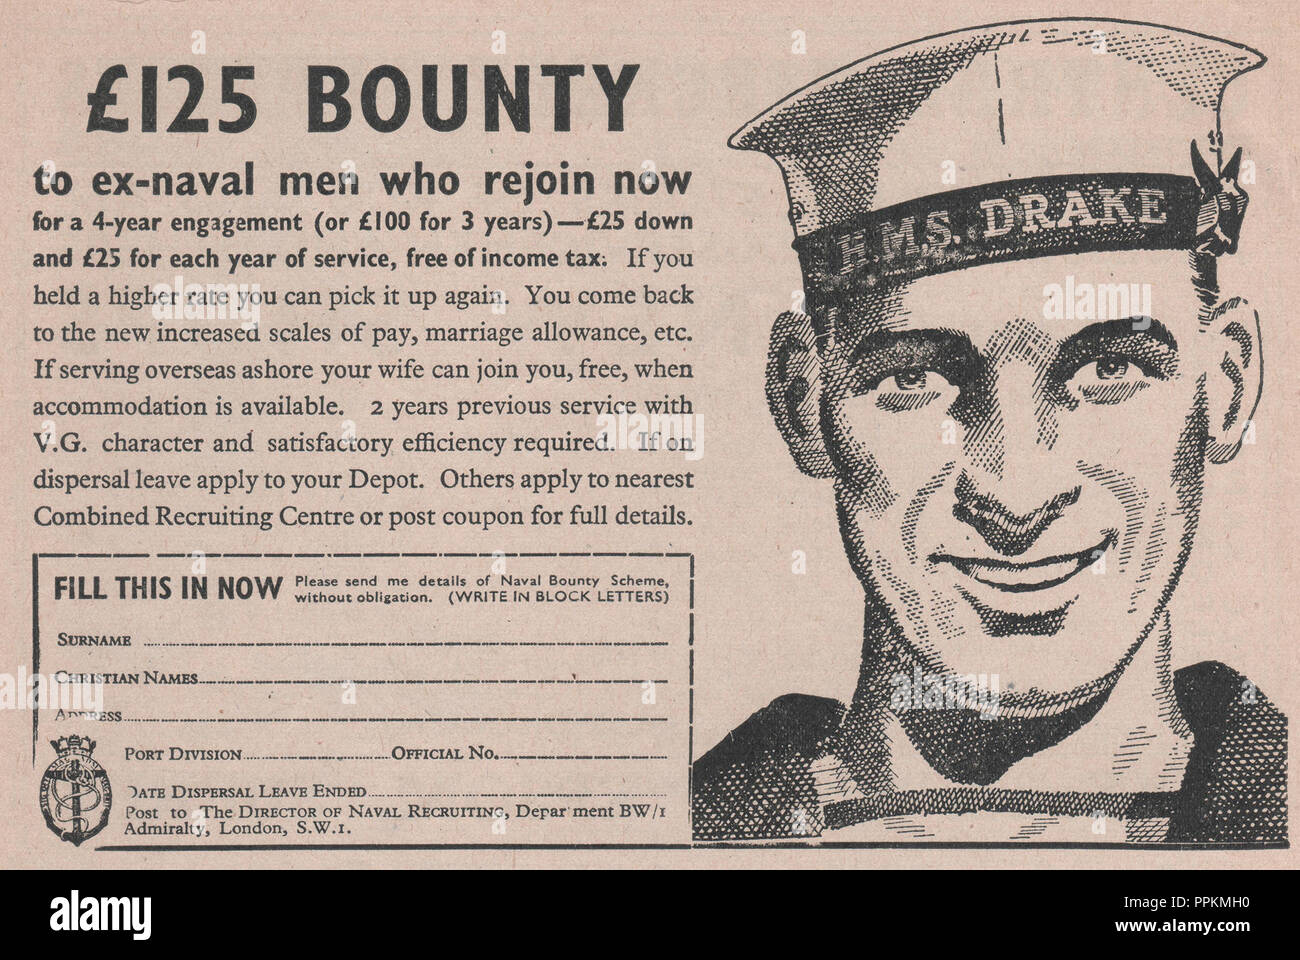 Vintage Royal Navy recruitment magazine advertisement for careers in the navy offering a bounty for ex-naval to rejoin the service published November 1946. Stock Photo